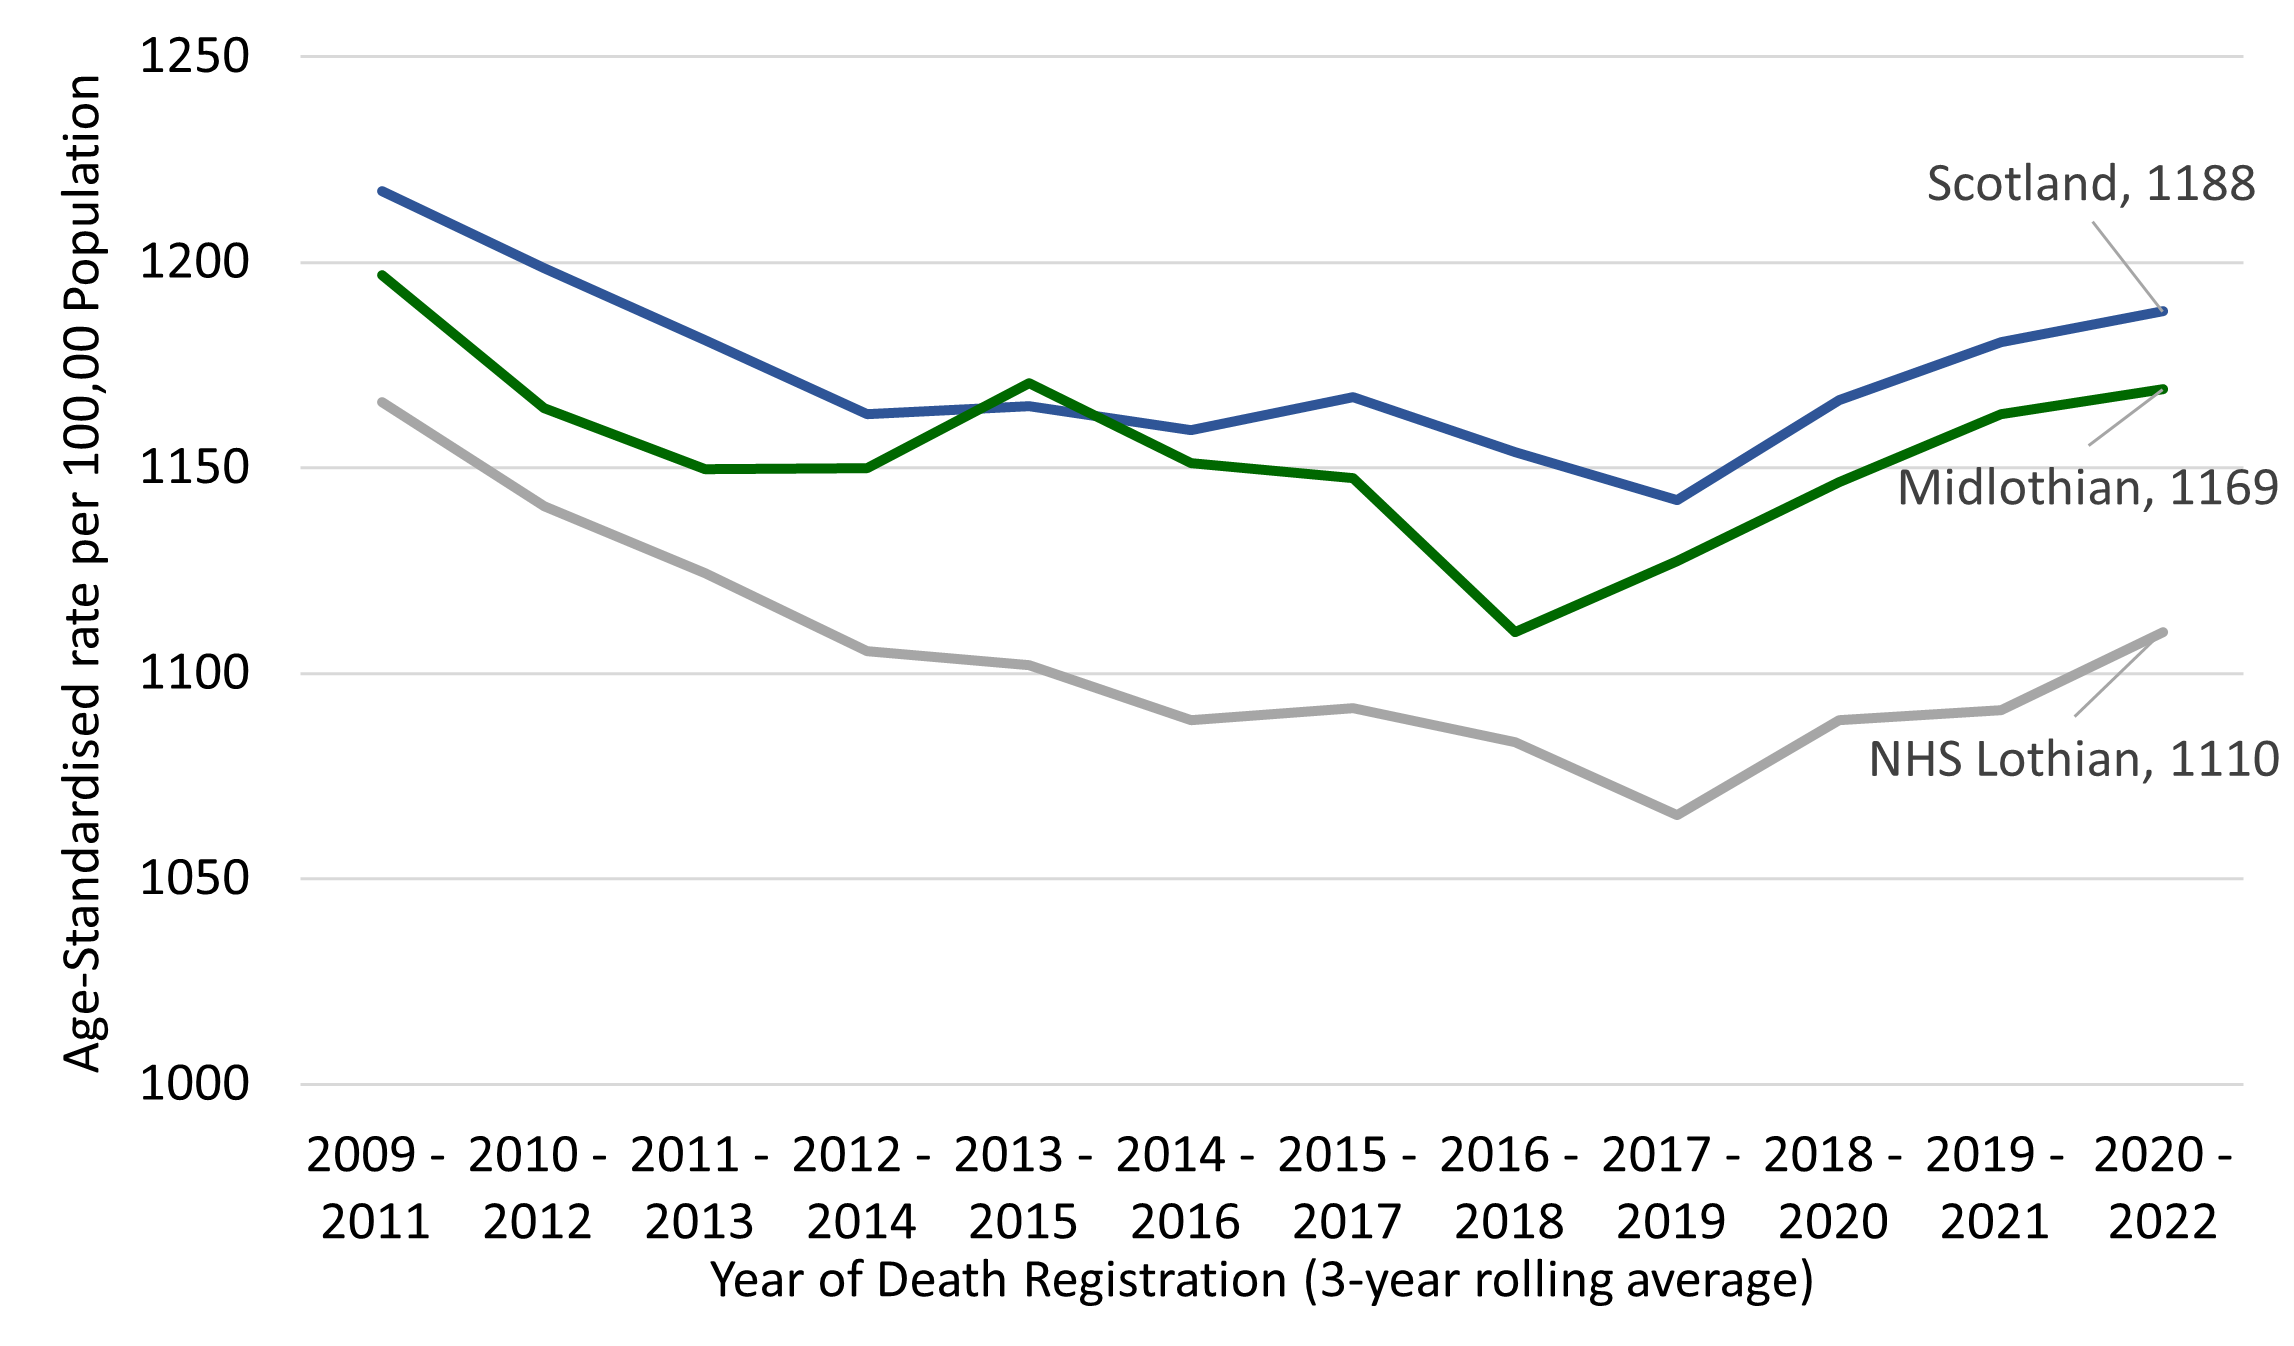 Line graph showing all cause mortality in Scotland, Lothian and Midlothian. Midlothian has a slightly lower rate than Scotland and Lothian is lower than Midlothian. The 3-year rolling average has not changed much over time from 2009-2011 to 2020-2022. 